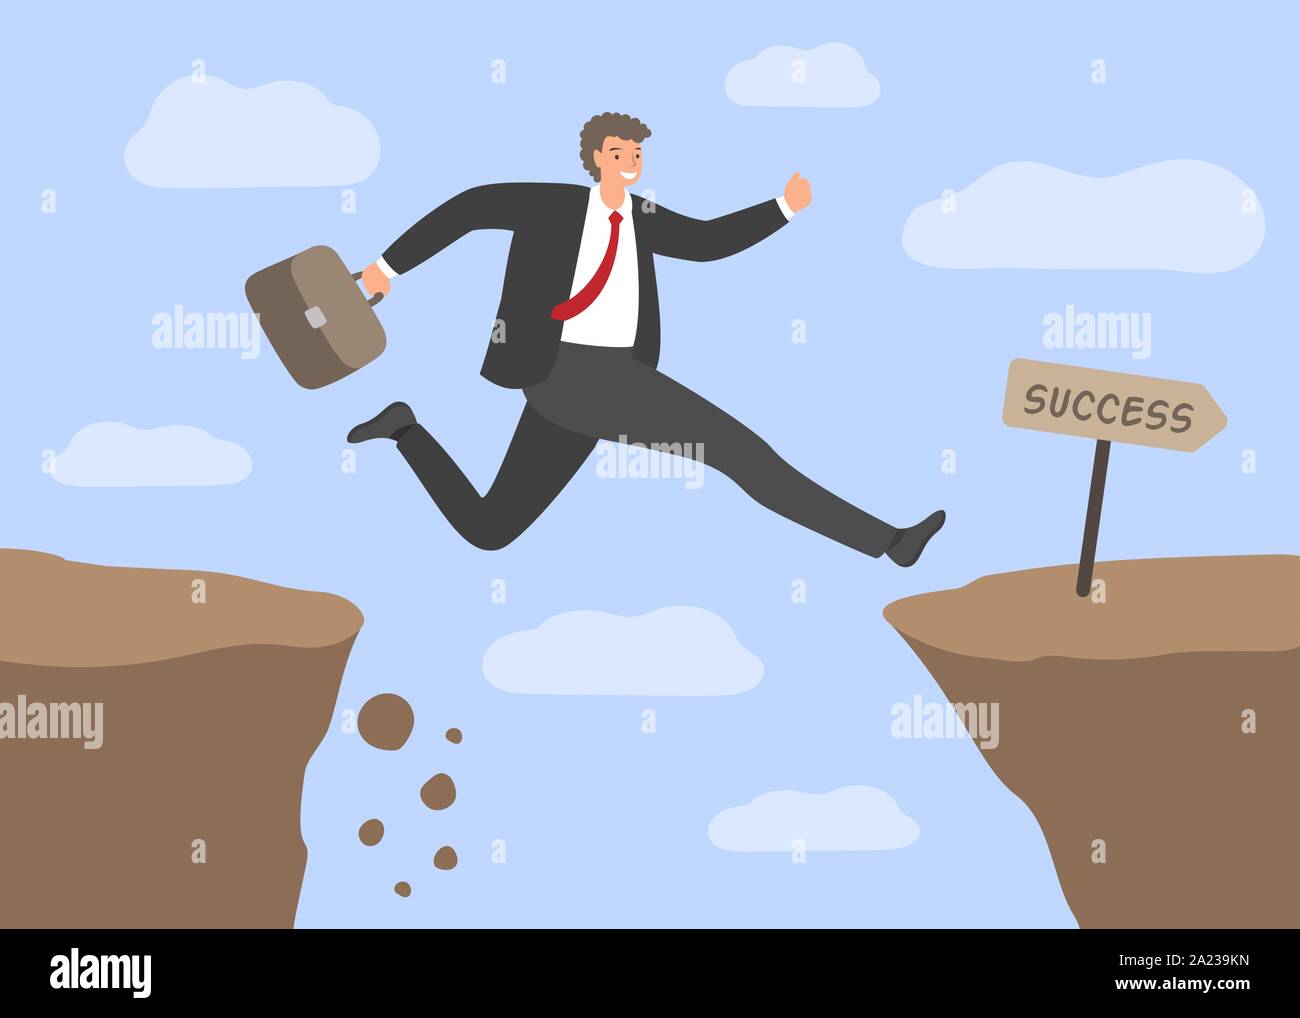 Challenges and success . Businessman Jumping over the abyss. Concept of business risks, overcoming obstacles in work, hard way to success. Vector Stock Vector